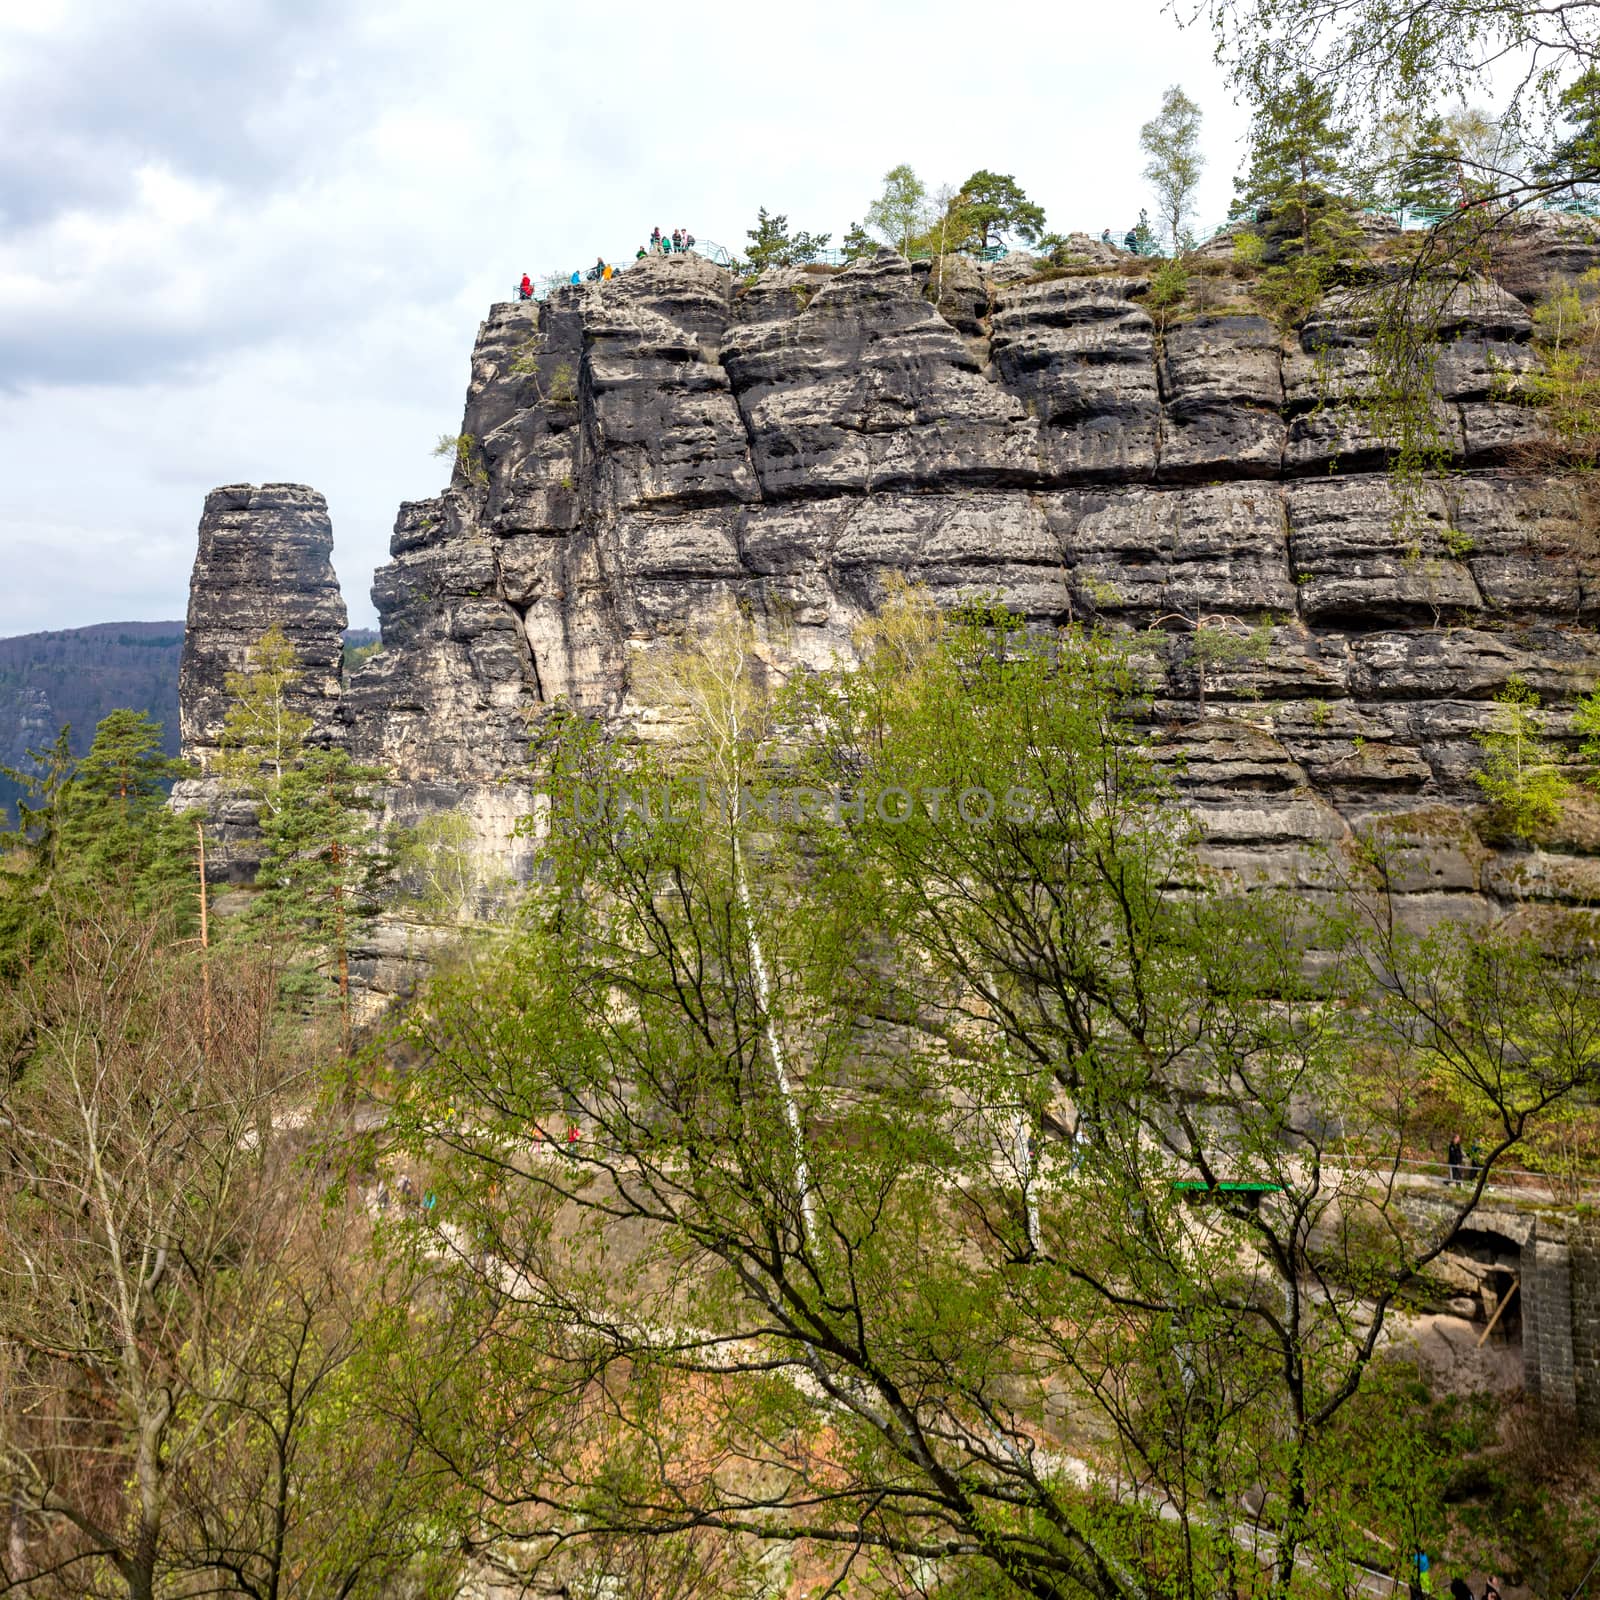 The Elbe Sandstone Mountains are a sandstone massif on the upper reaches of the Elbe River in Germany and the Czech Republic. Czech Bohemia or Saxony in Germany.